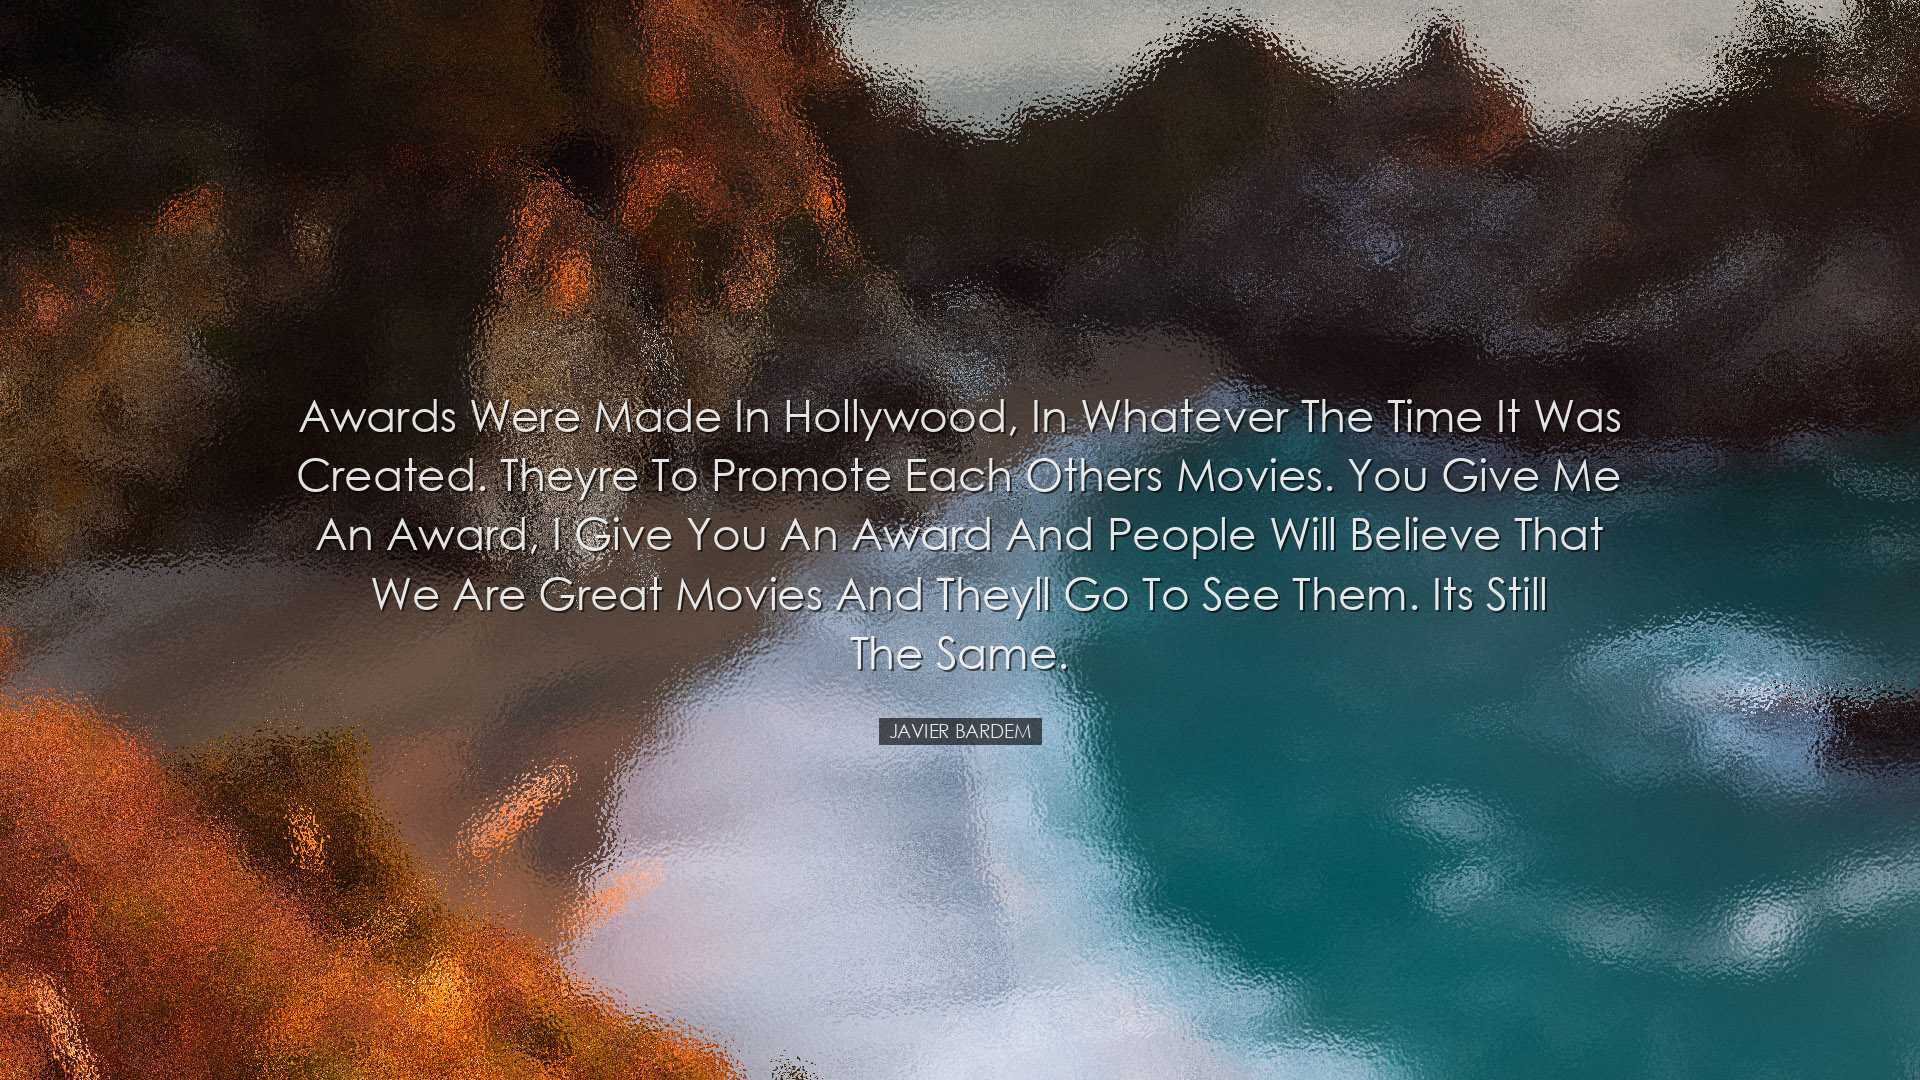 Awards were made in Hollywood, in whatever the time it was created